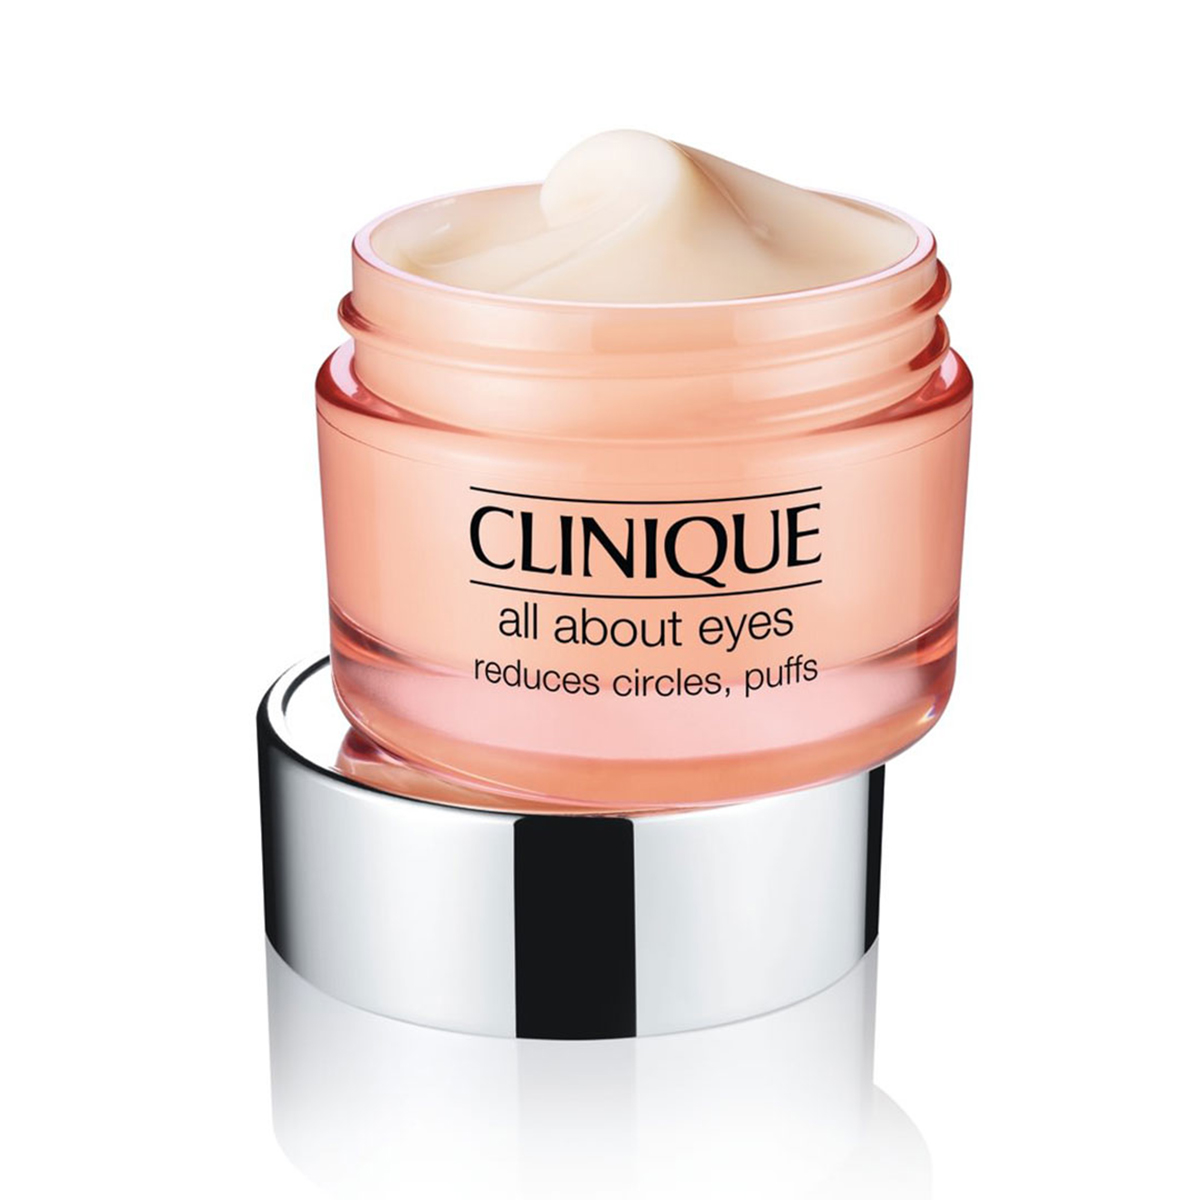 Clinique All About Eyes(tm) Eye Cream